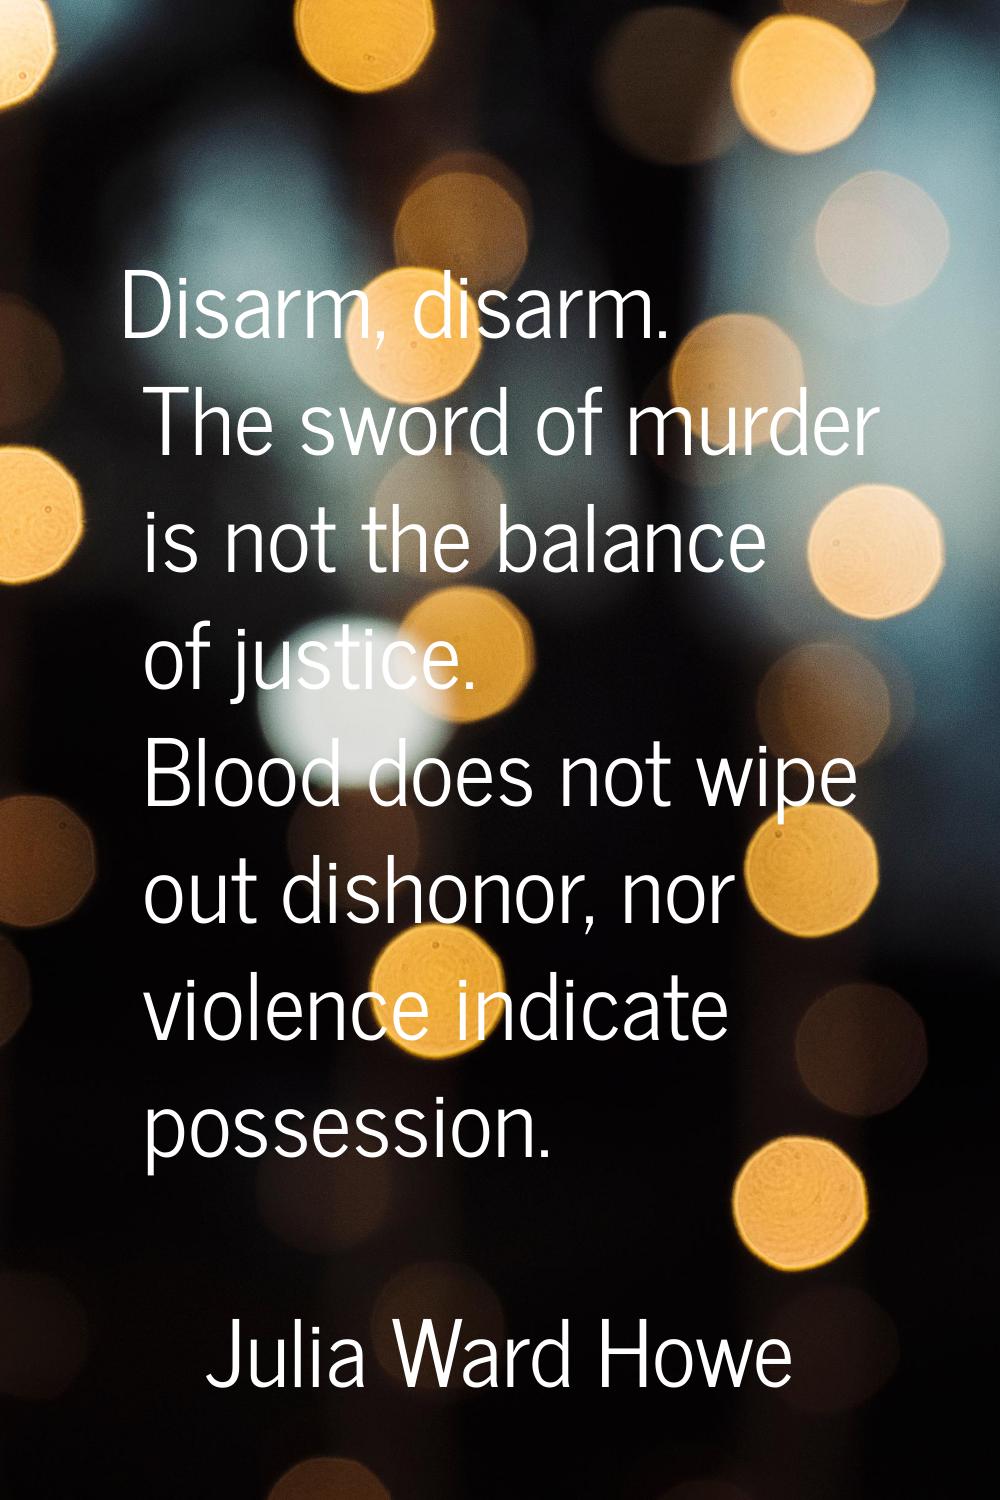 Disarm, disarm. The sword of murder is not the balance of justice. Blood does not wipe out dishonor